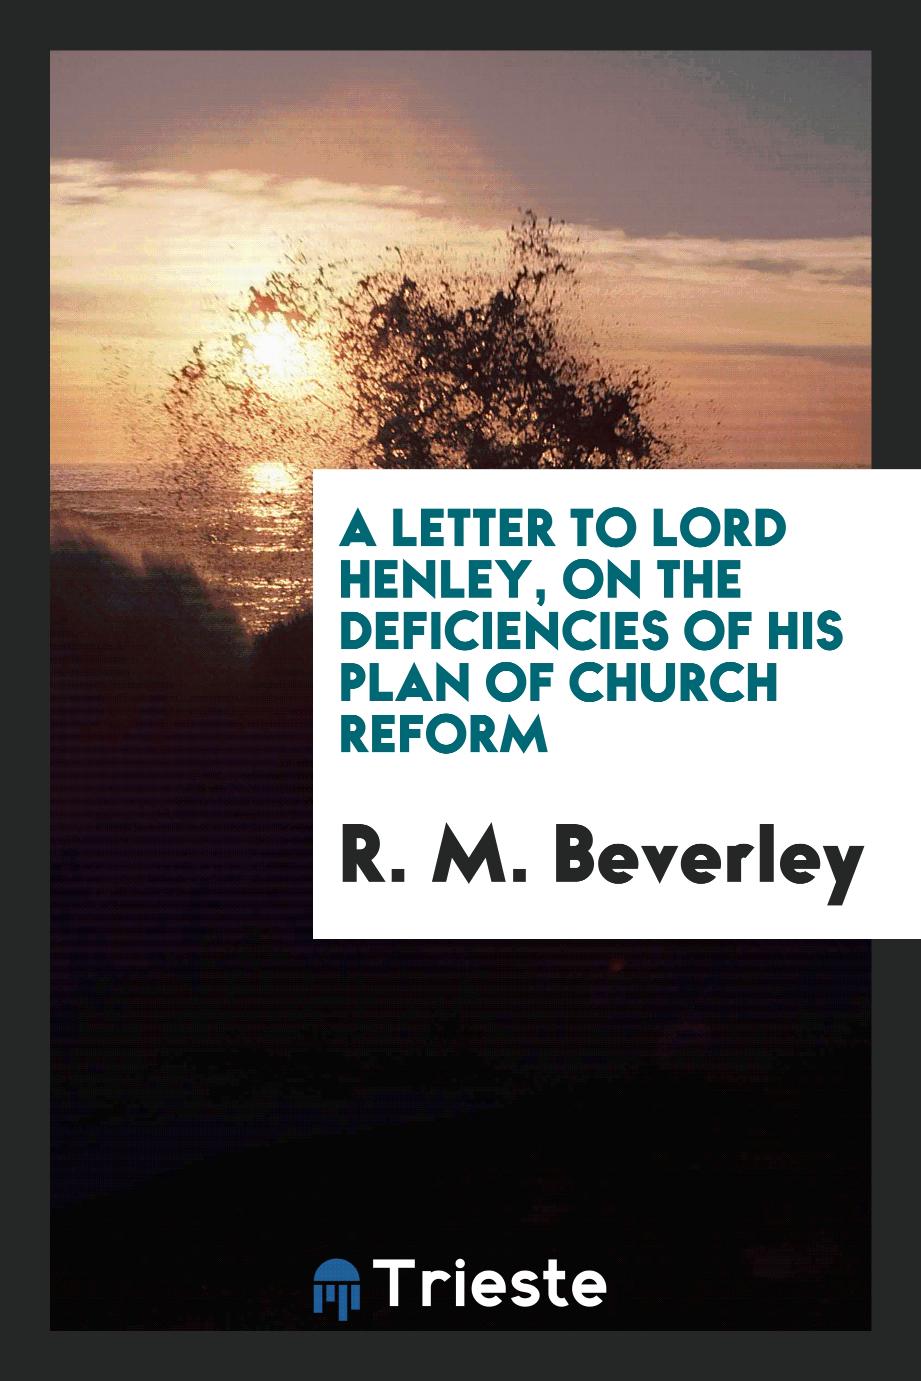 A letter to lord Henley, on the deficiencies of his plan of Church reform